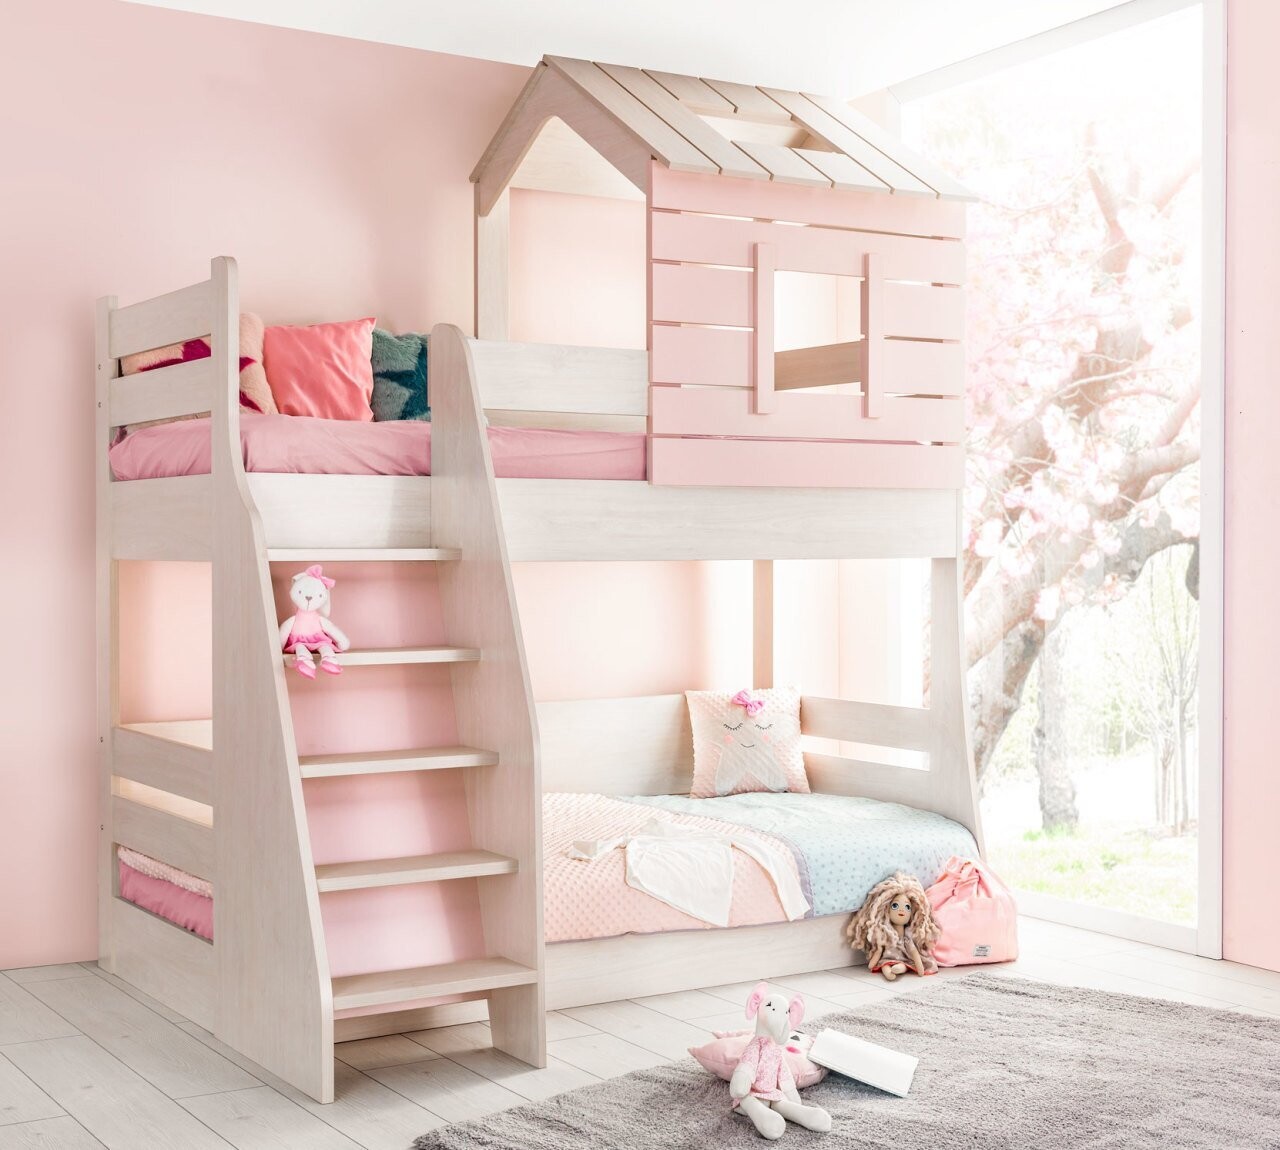 PINK HOUSE BUNK BED 90x200